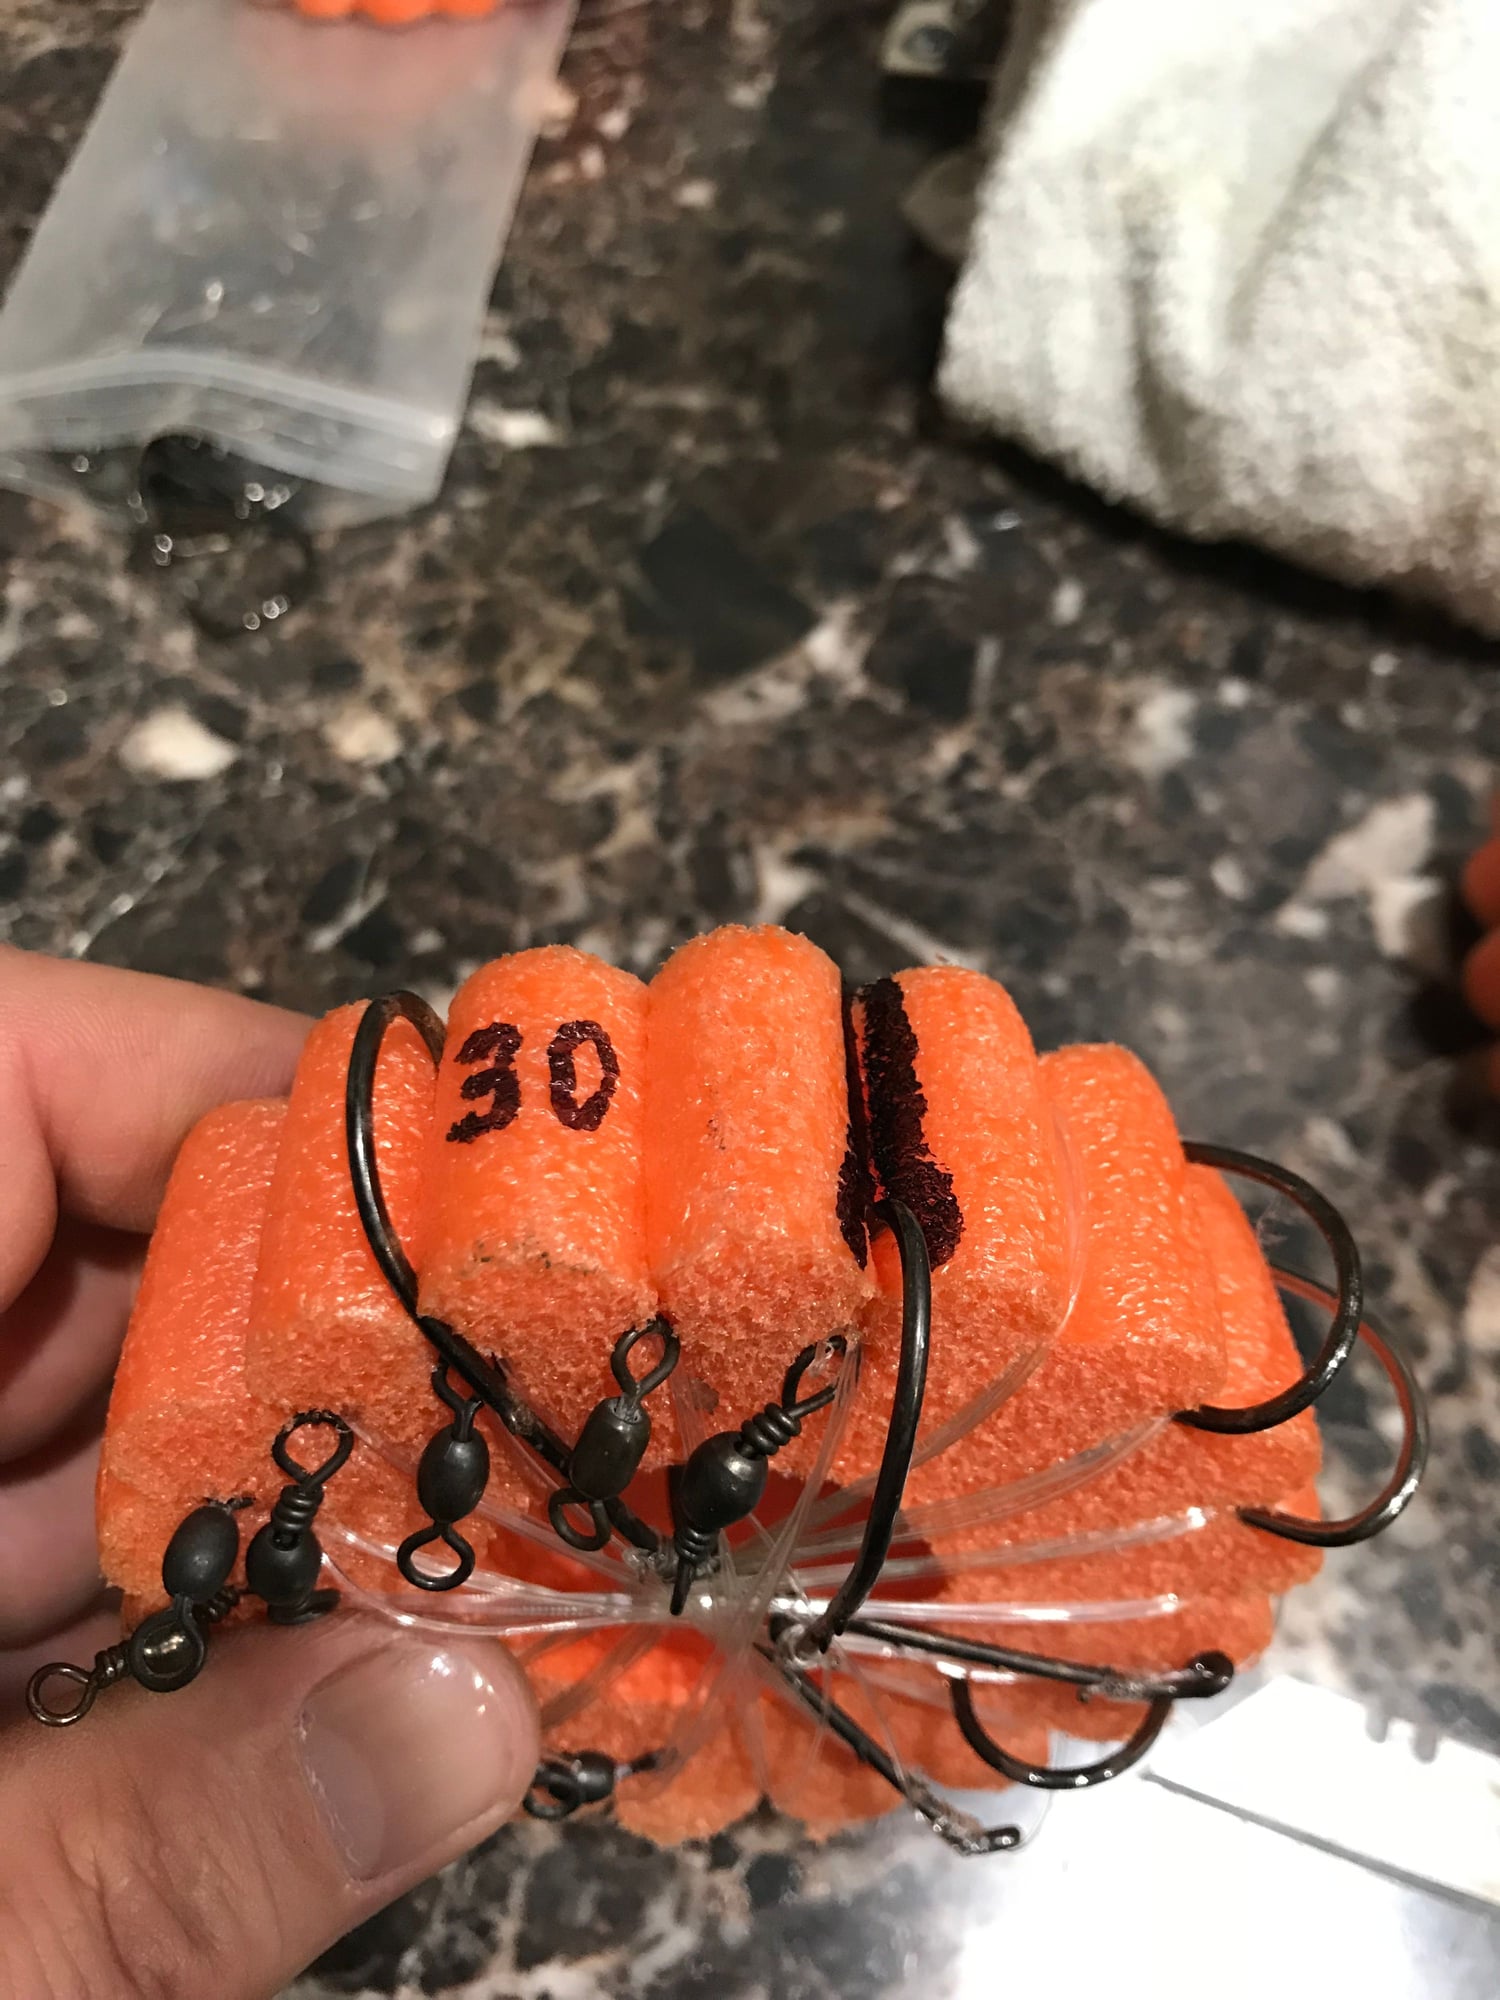 How are ya'll storing pre-made bottom fishing rigs/deep drop rigs